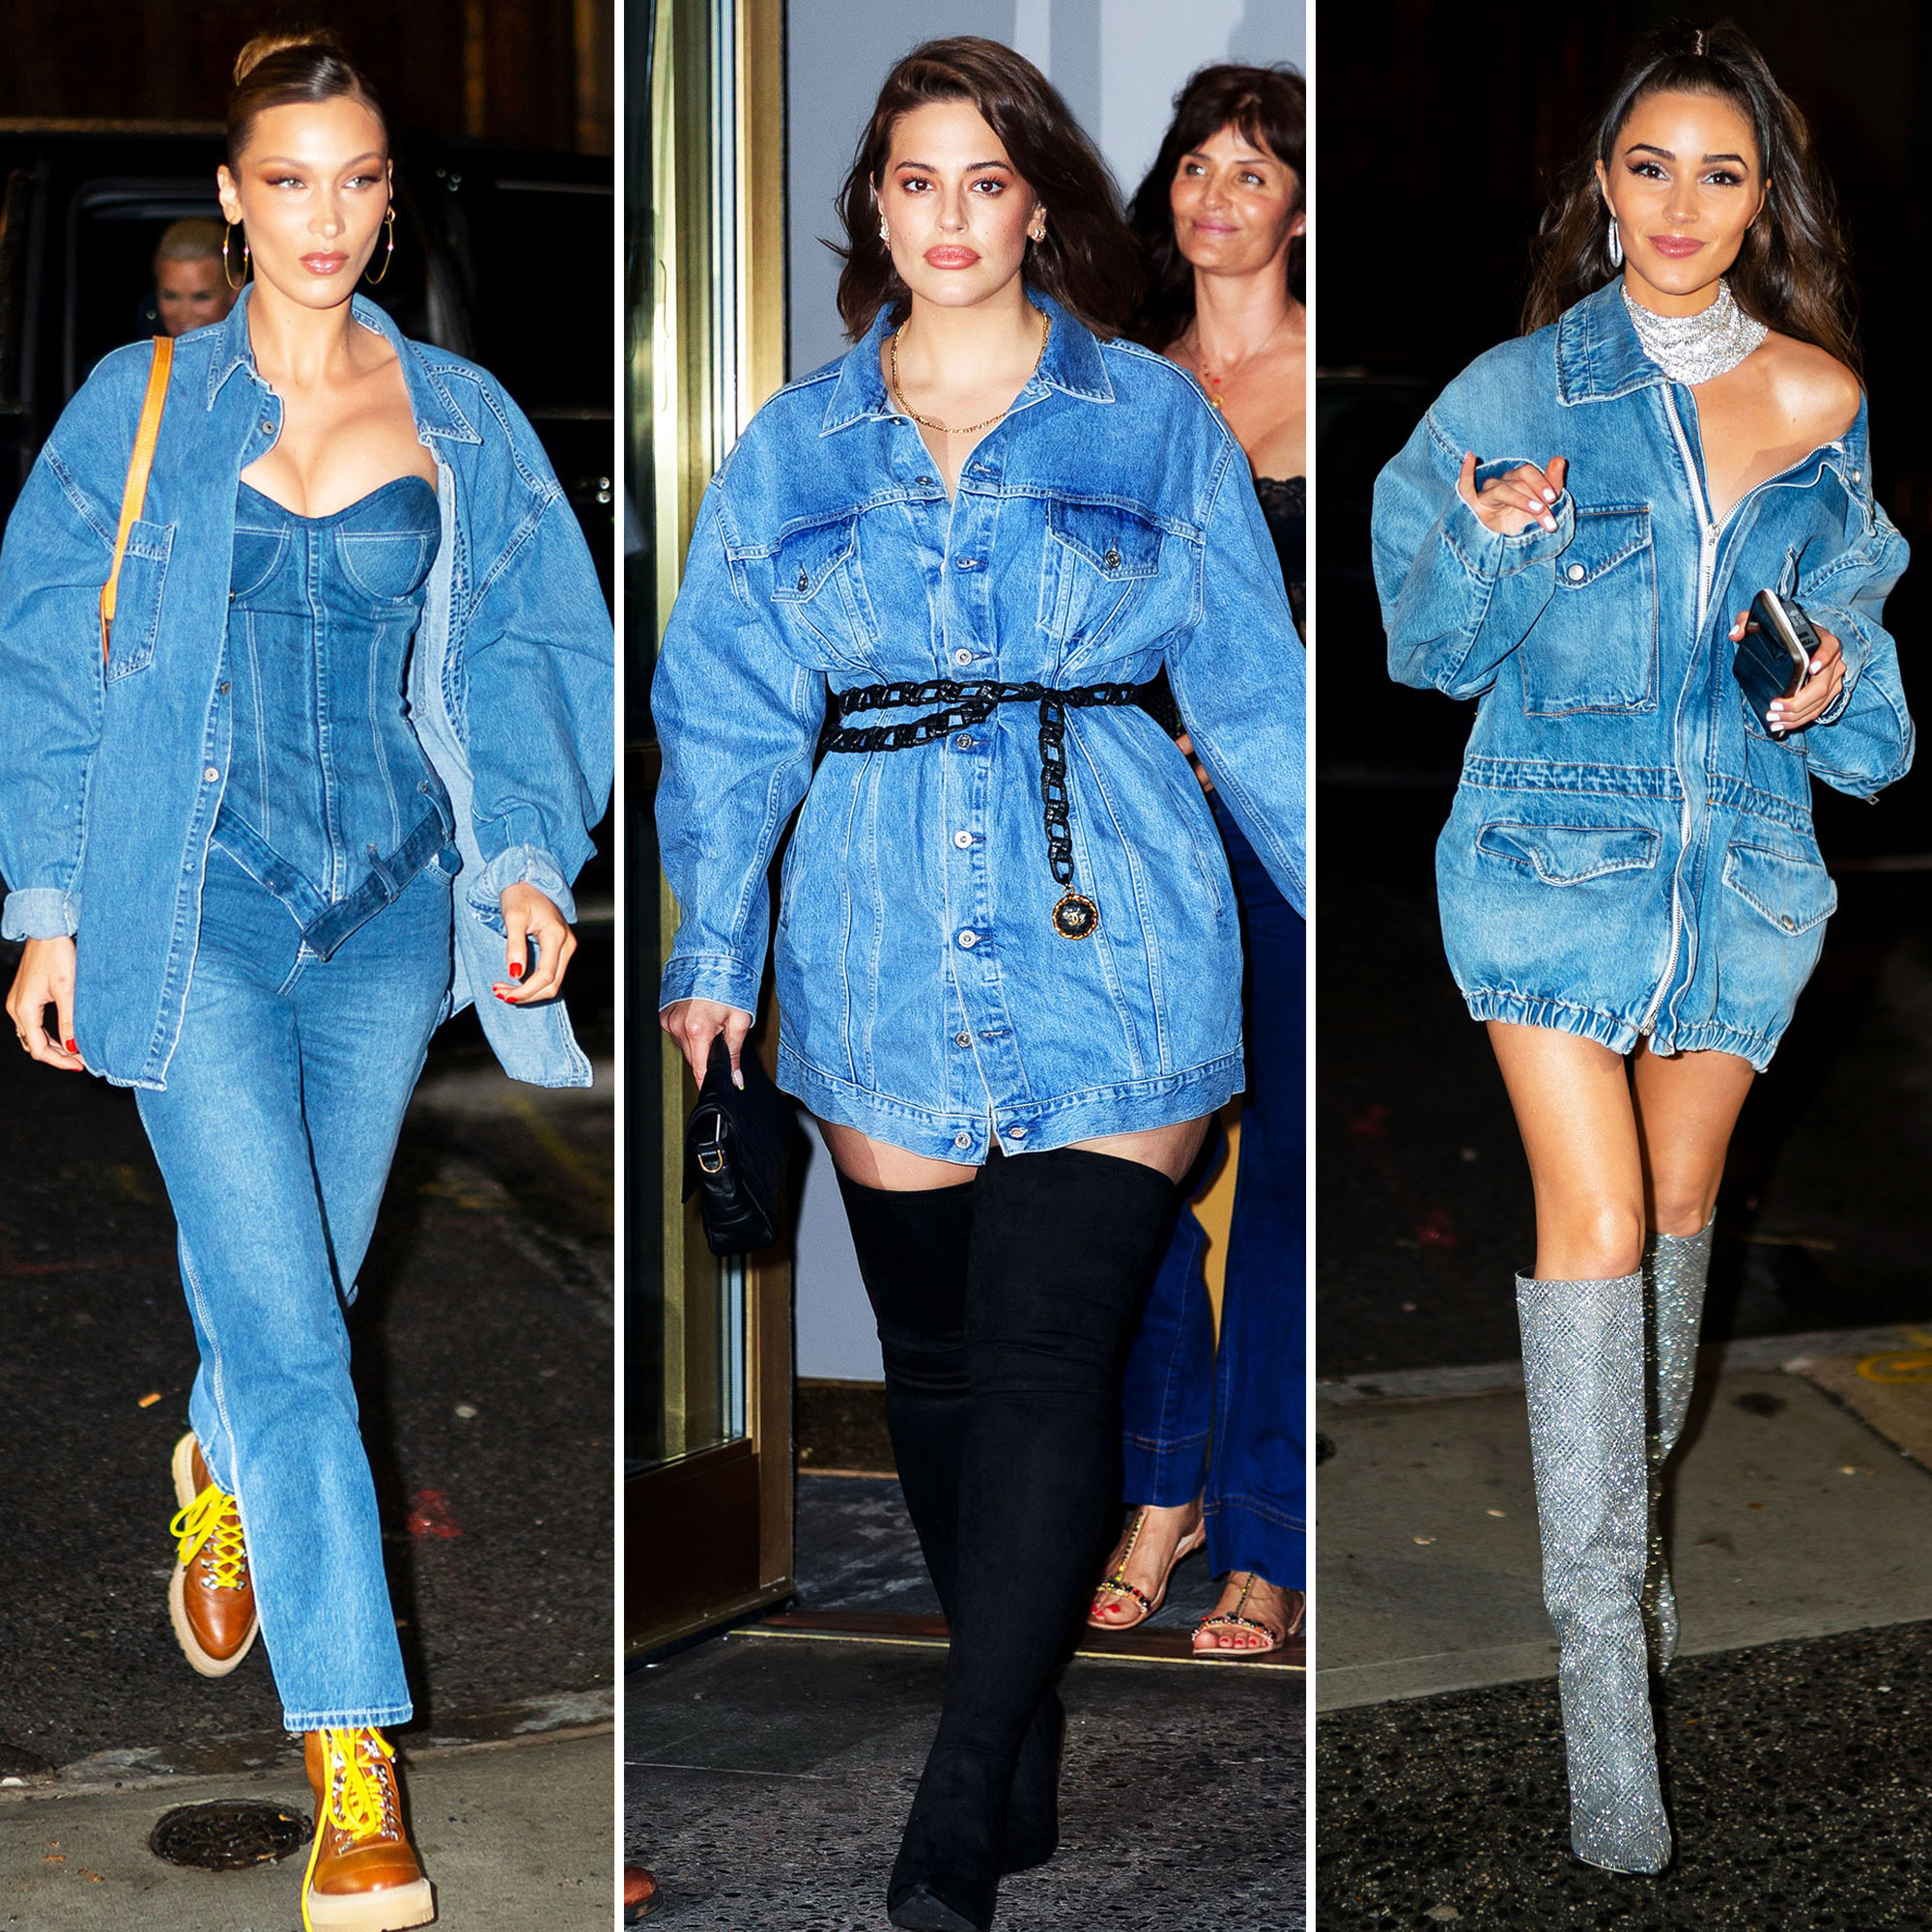 Bella Hadid Wore a Denim Corset Top and Gave the Canadian Tuxedo a